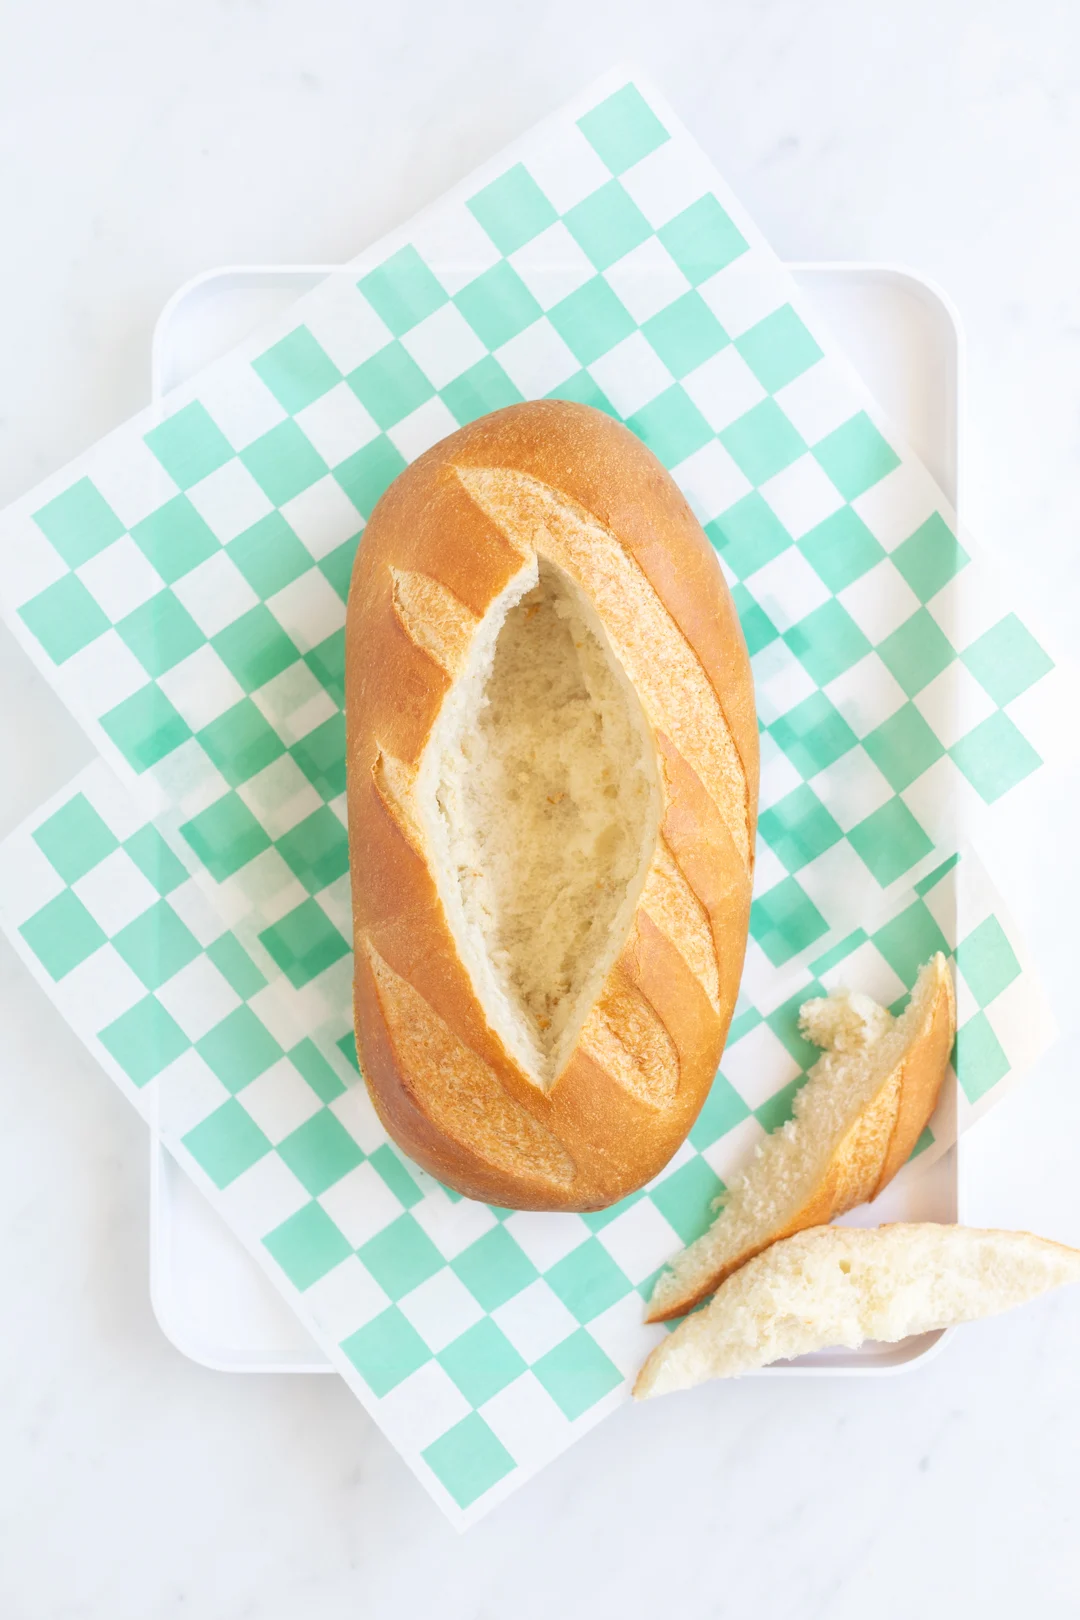 center cut out of oval shaped bread loaf to prepare to make football dip in bread bowl